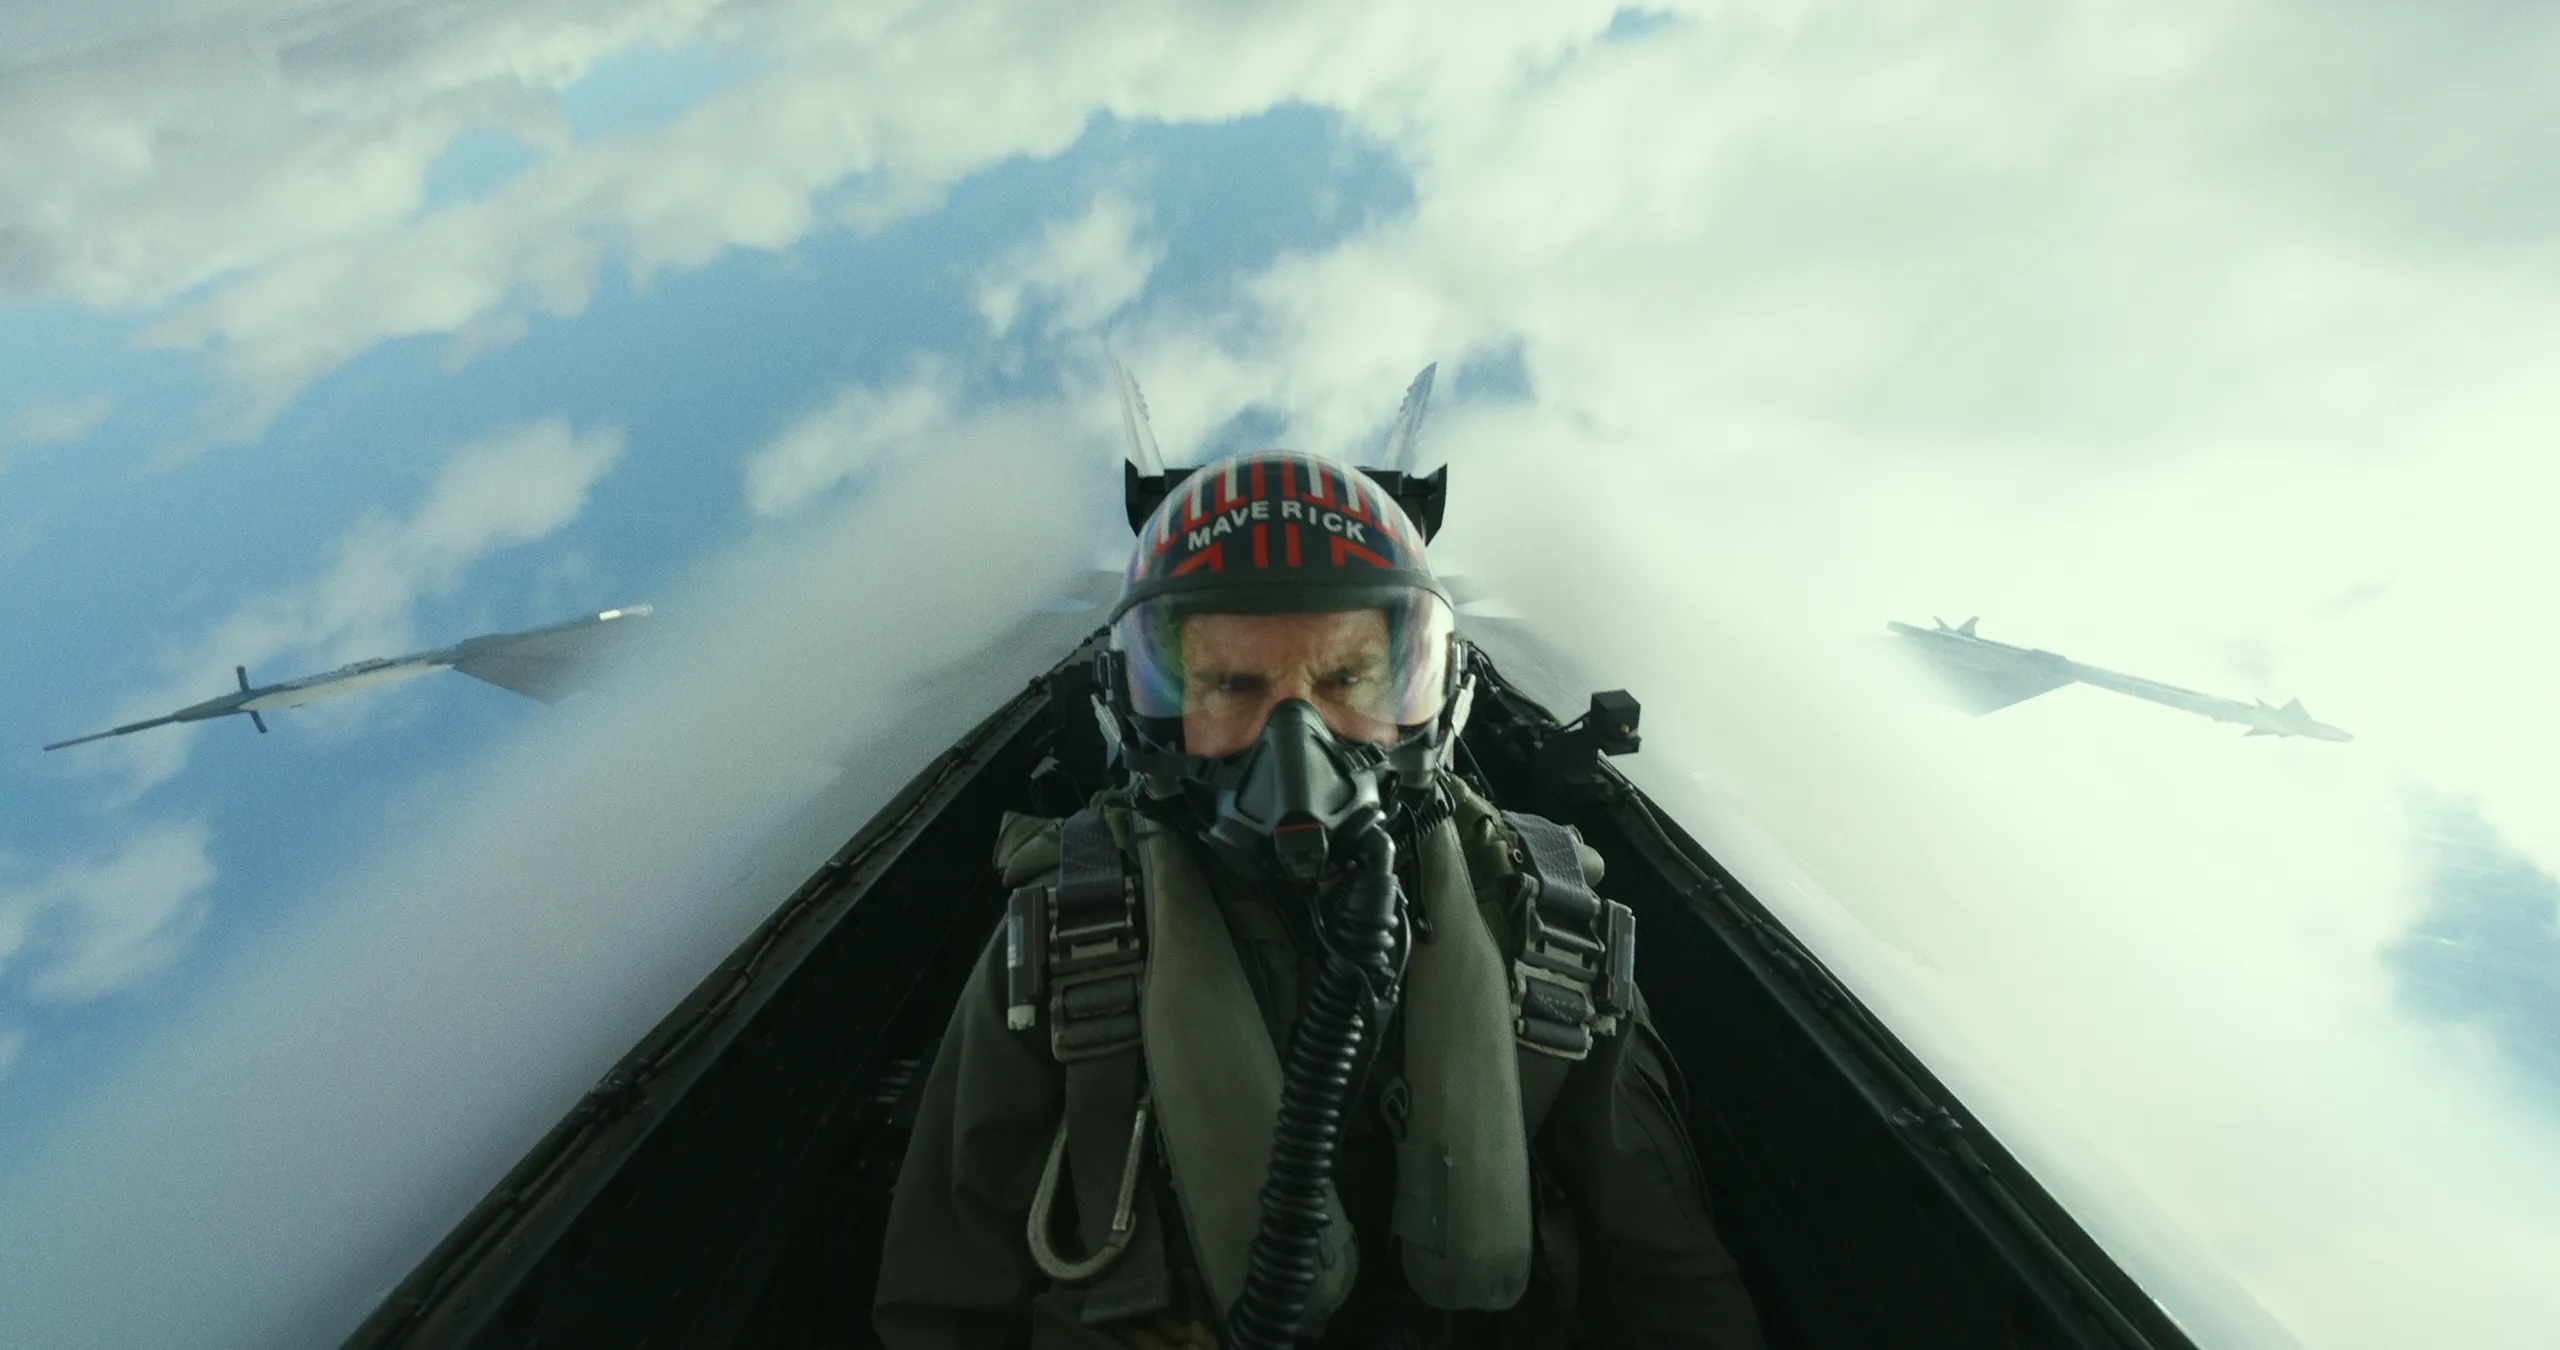 Top Gun: Maverick Is Another Military Recruitment Video Disguised as a Movie